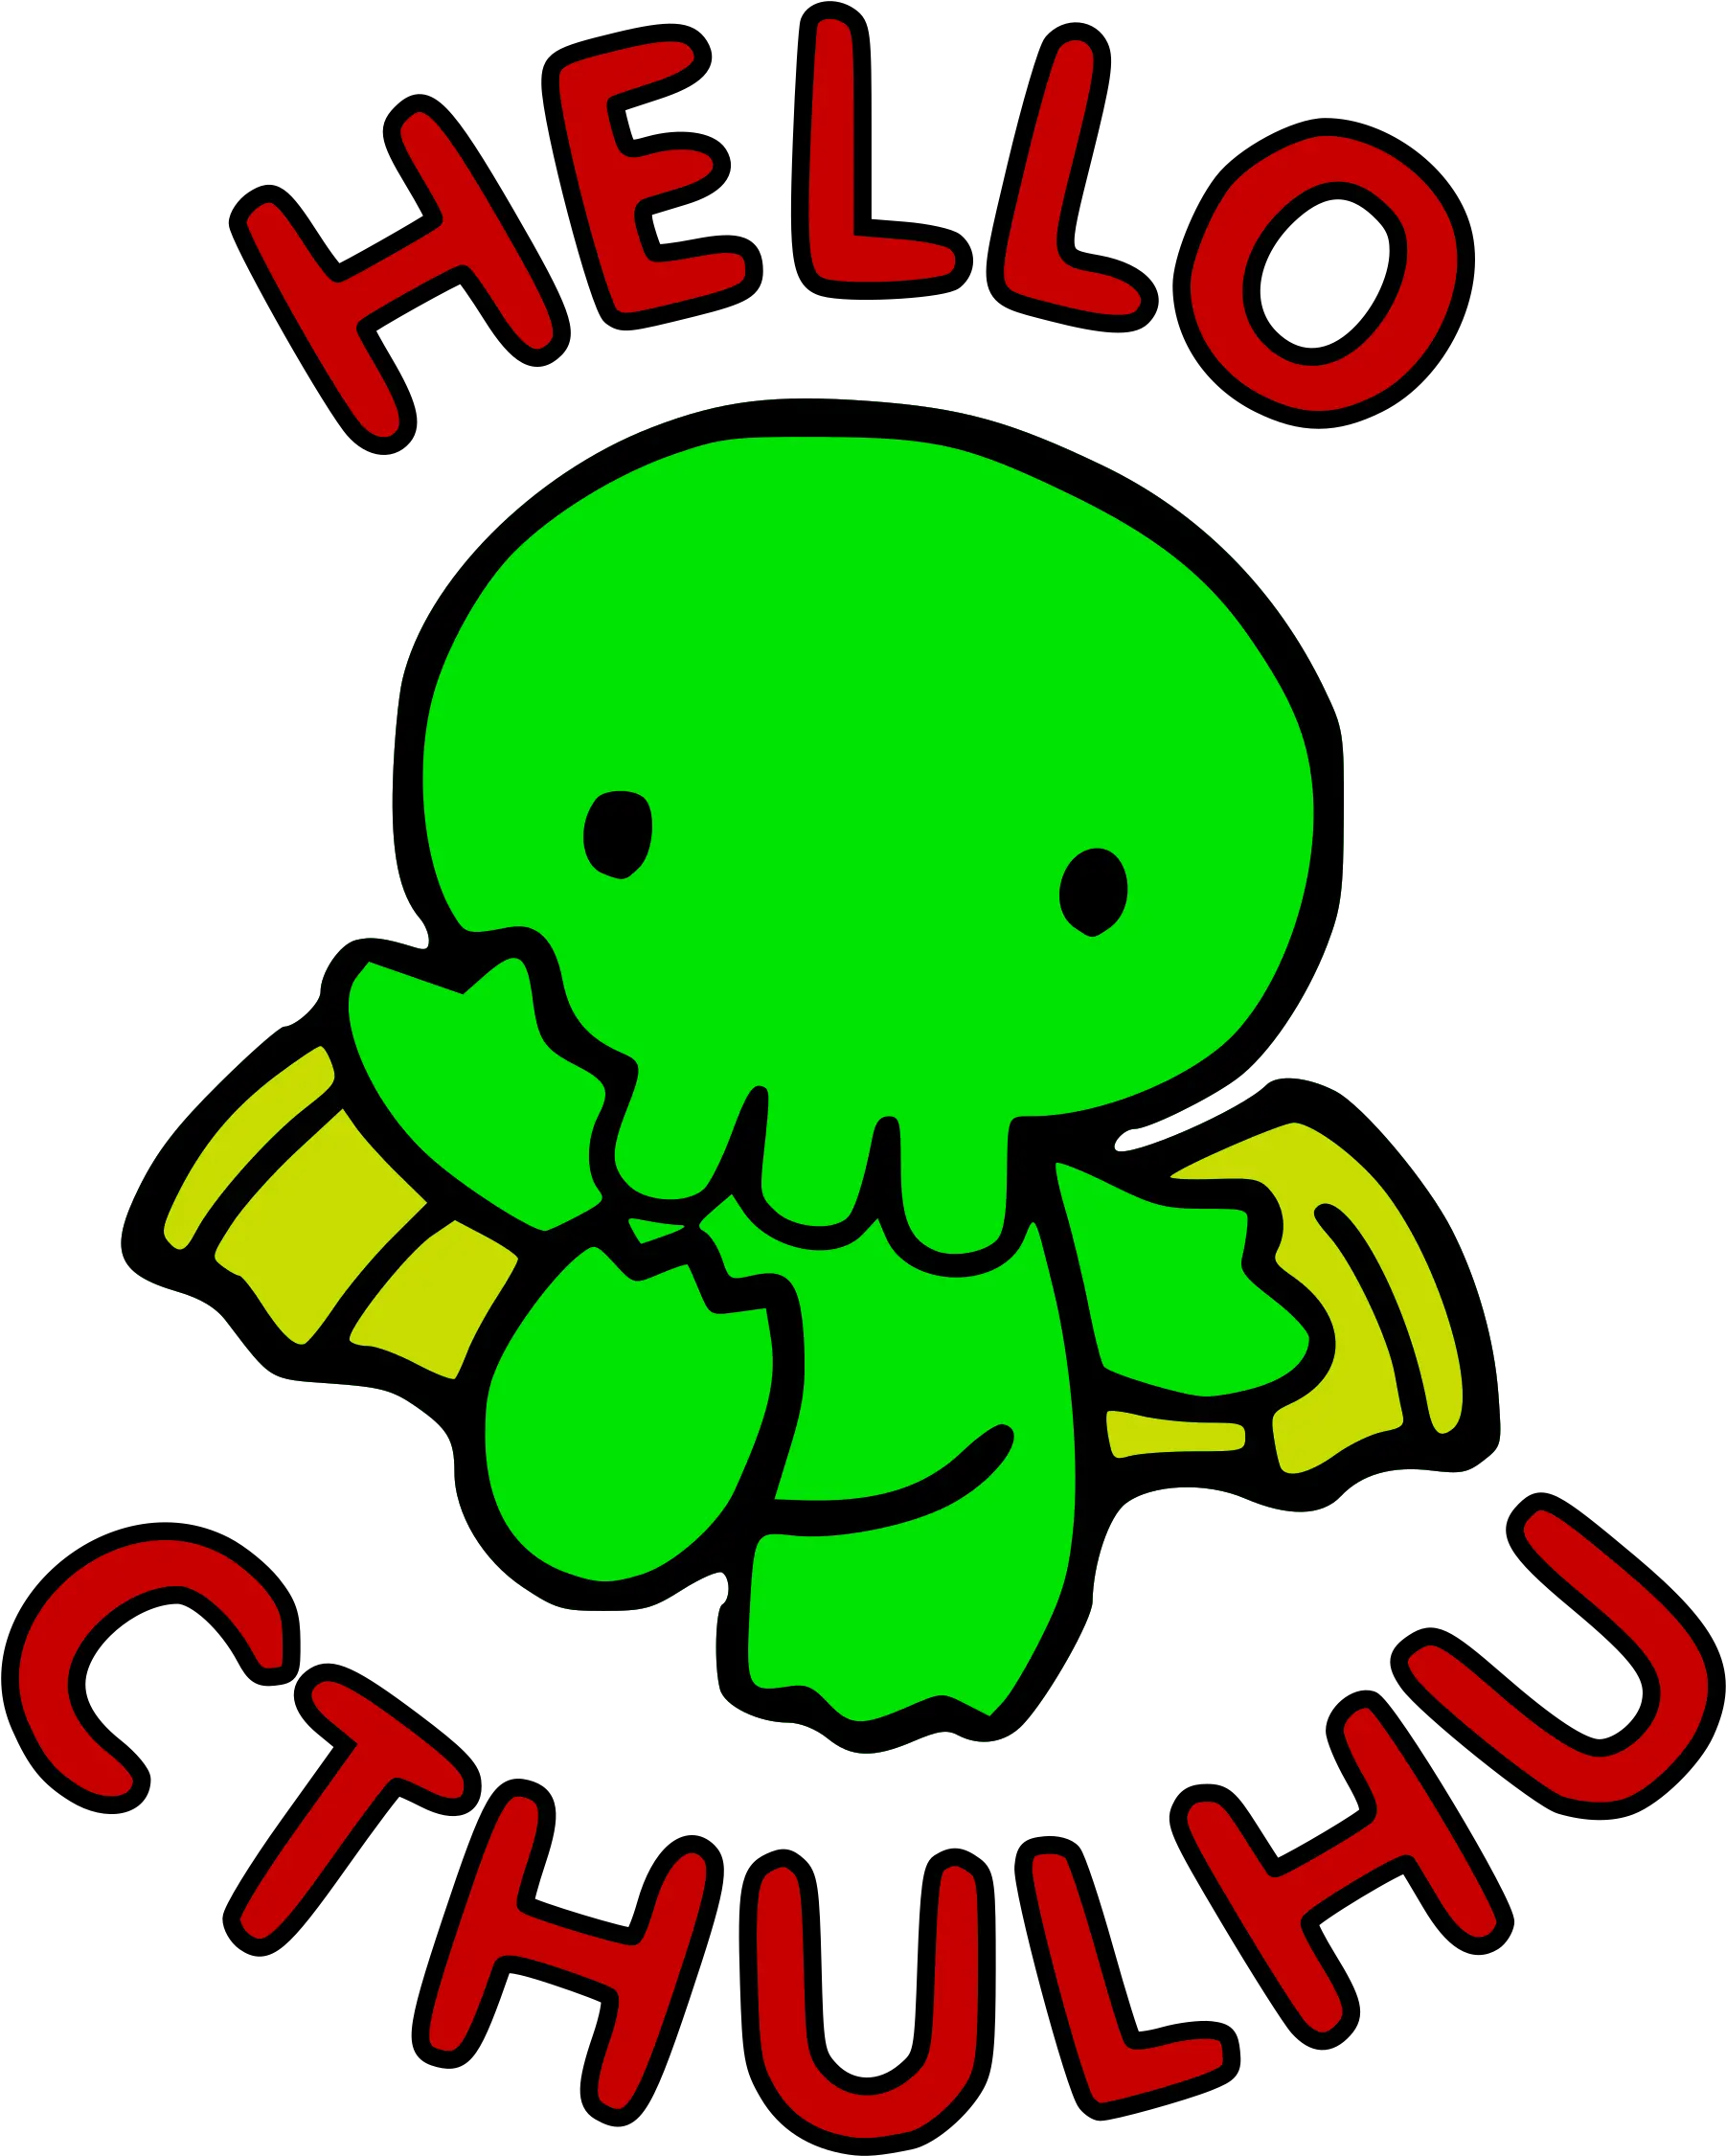 Download This Free Icons Png Design Of Hello Cthulhu Cthulhu Transparent